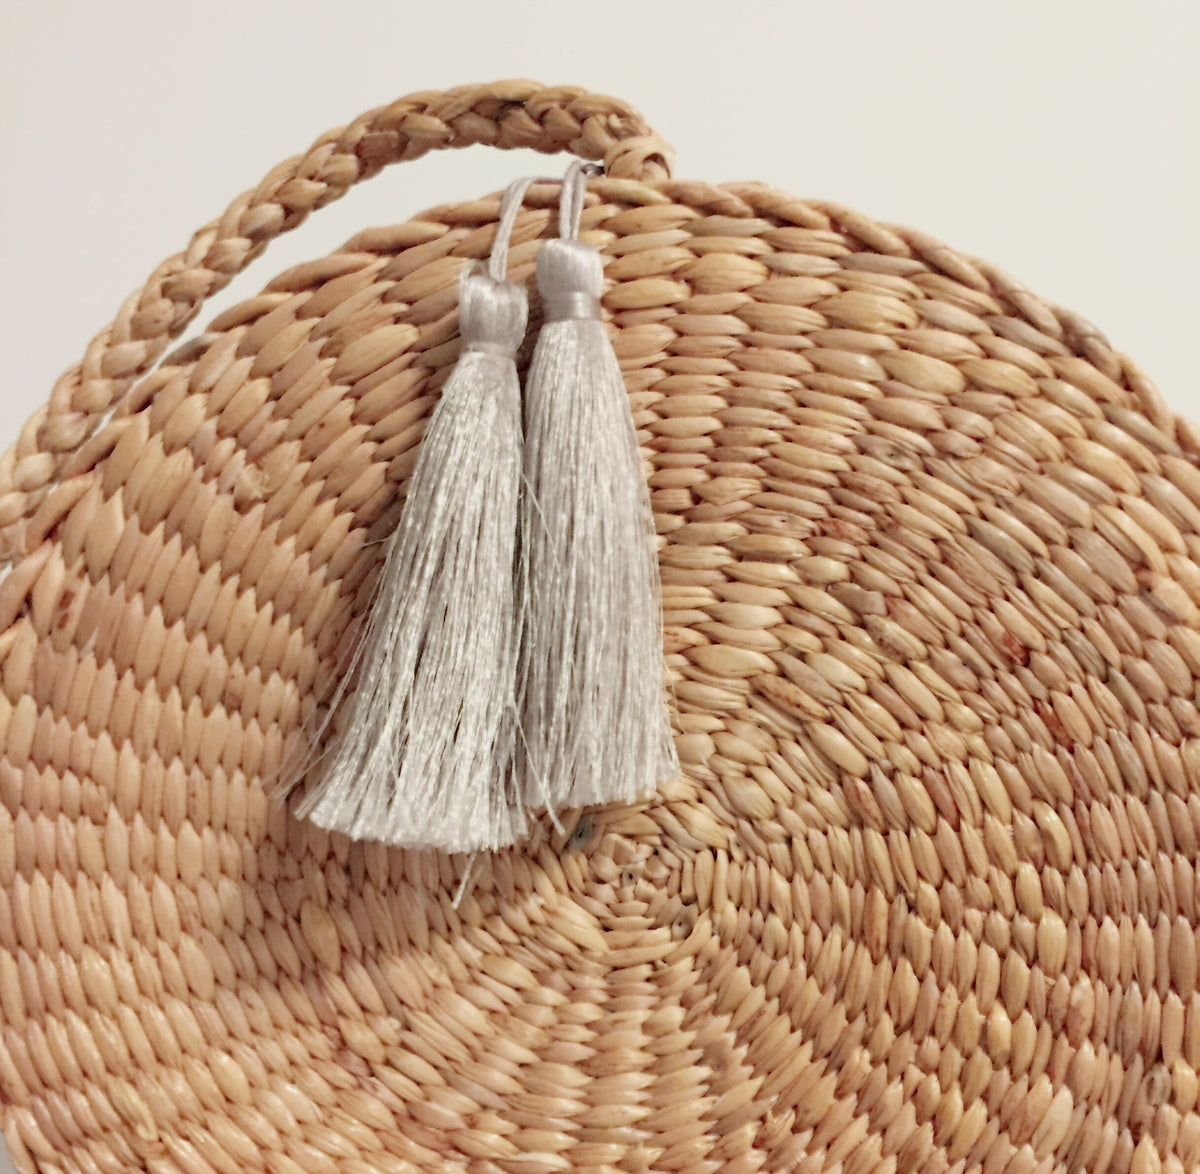 New Saturday Straw Bag (with handles)